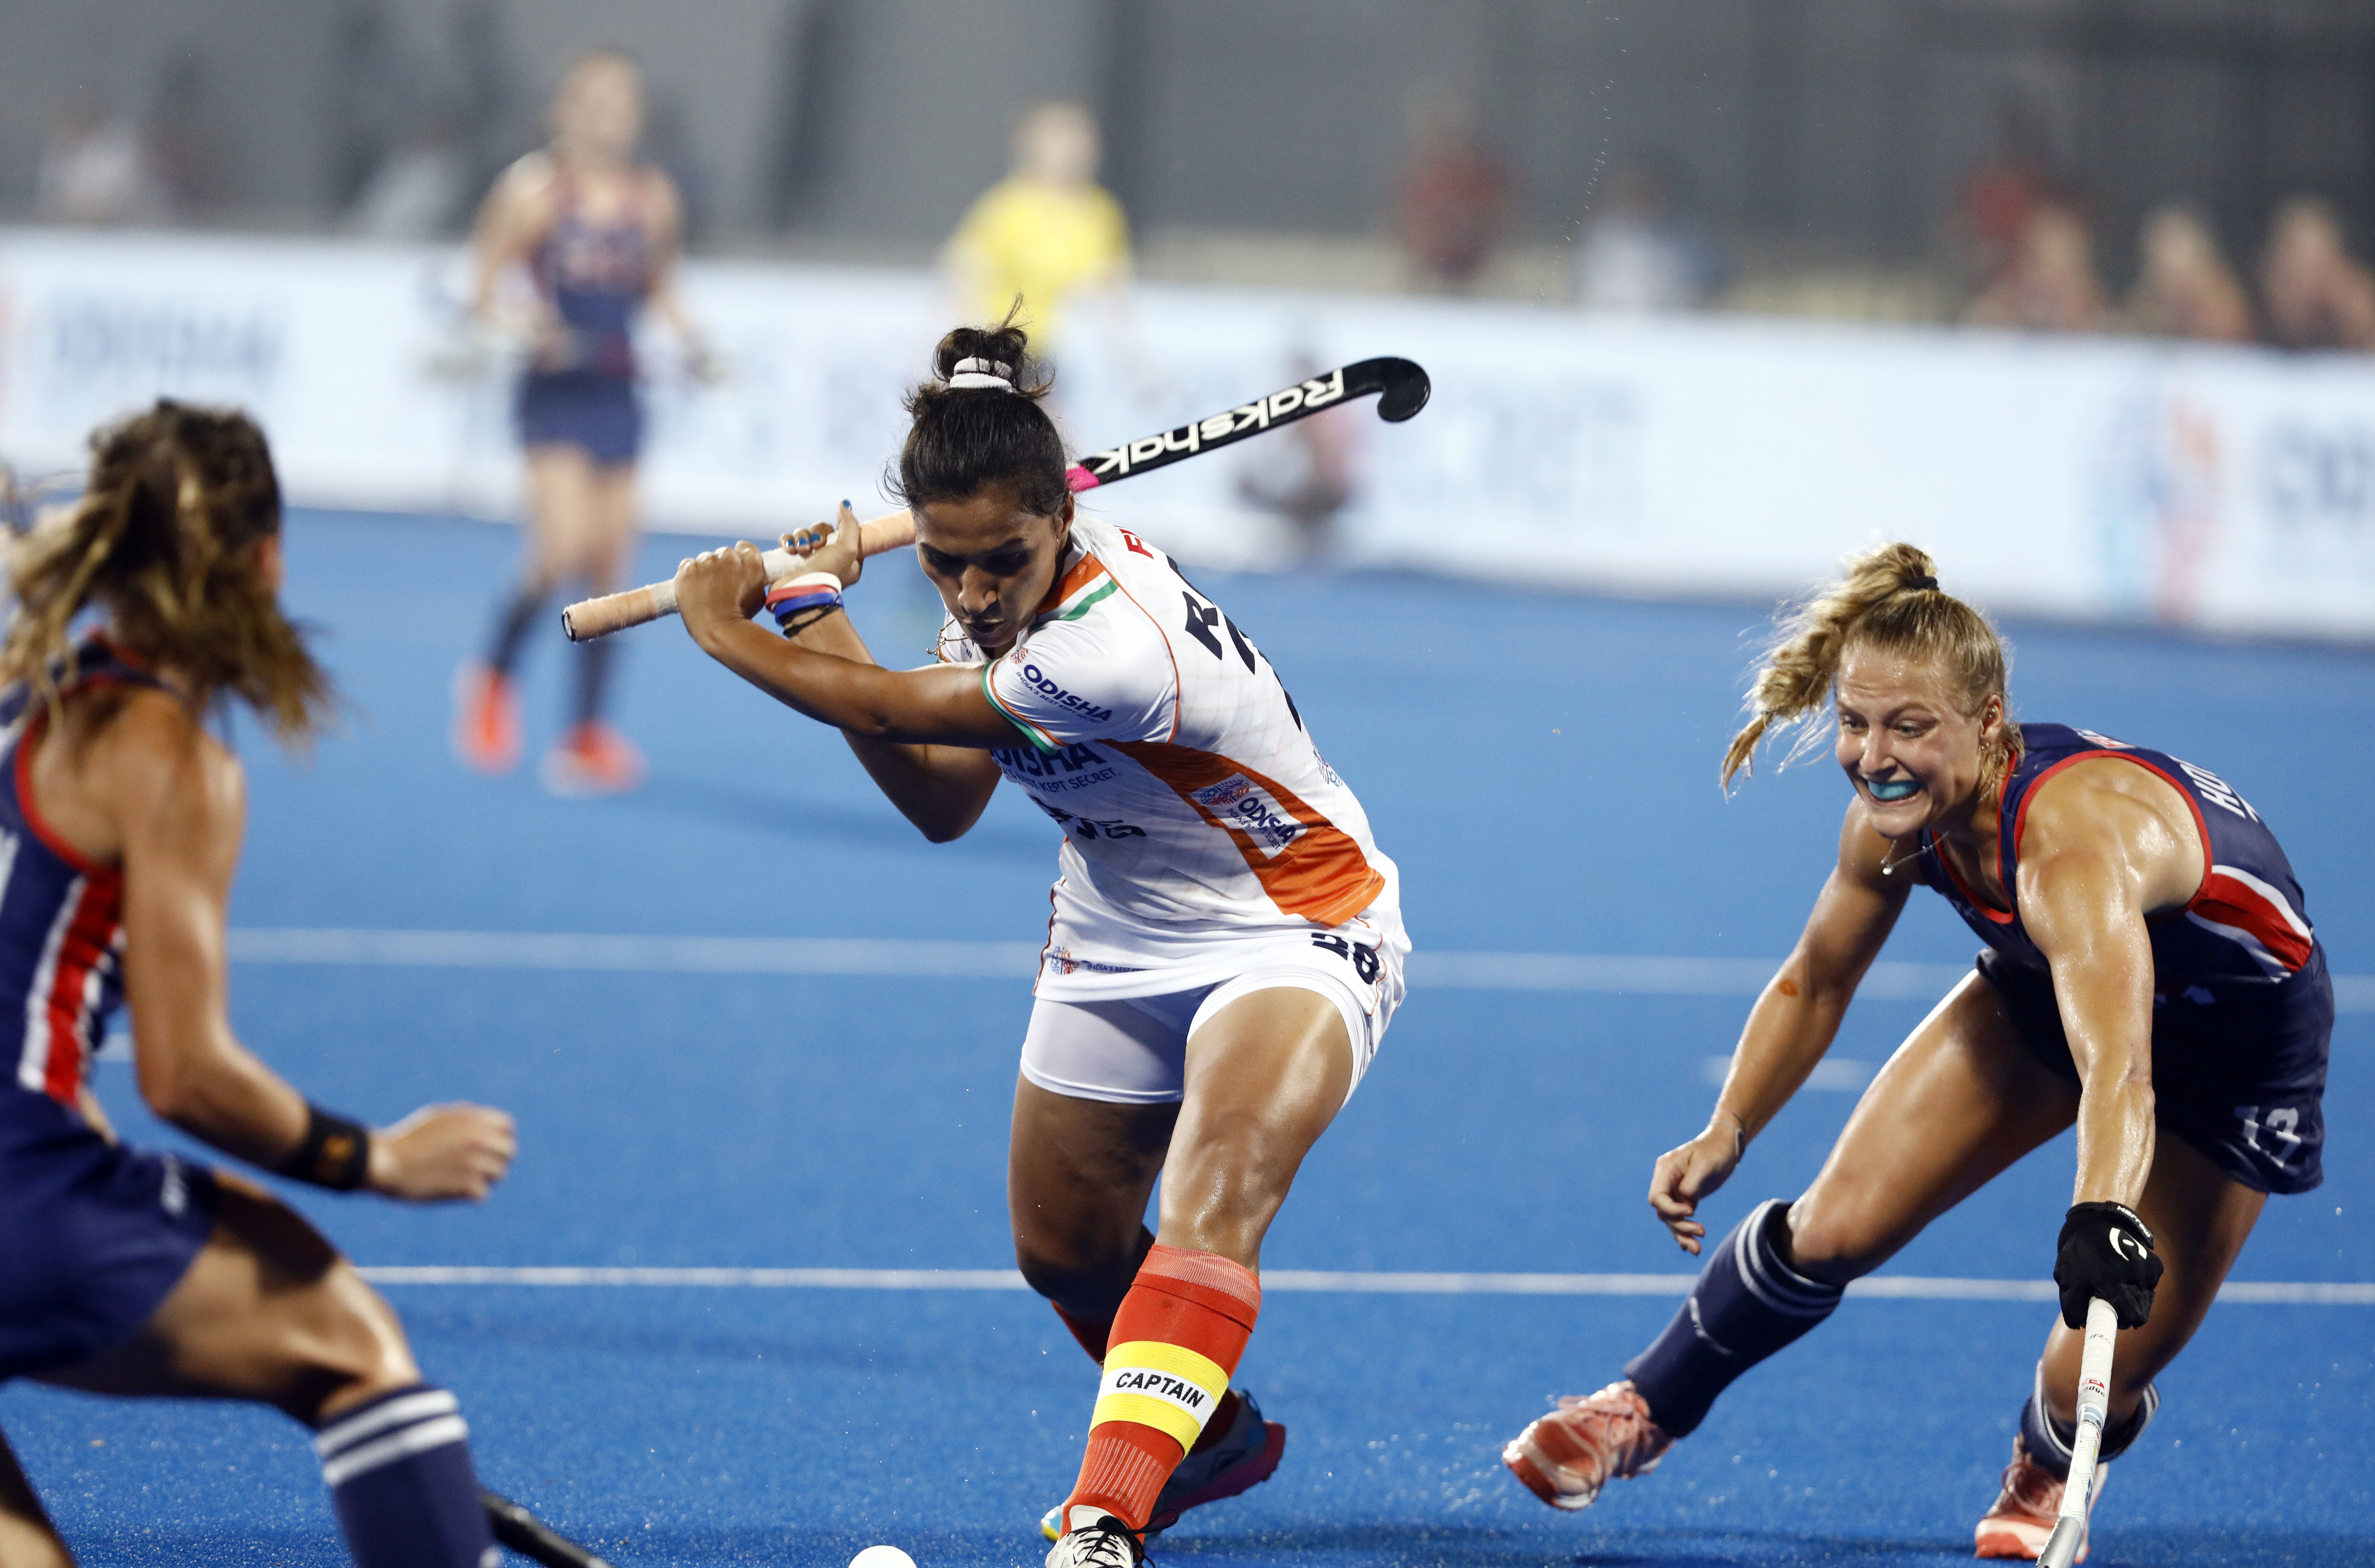 Olympic postponement was disheartening but it also had a positive side, claims Rani Rampal